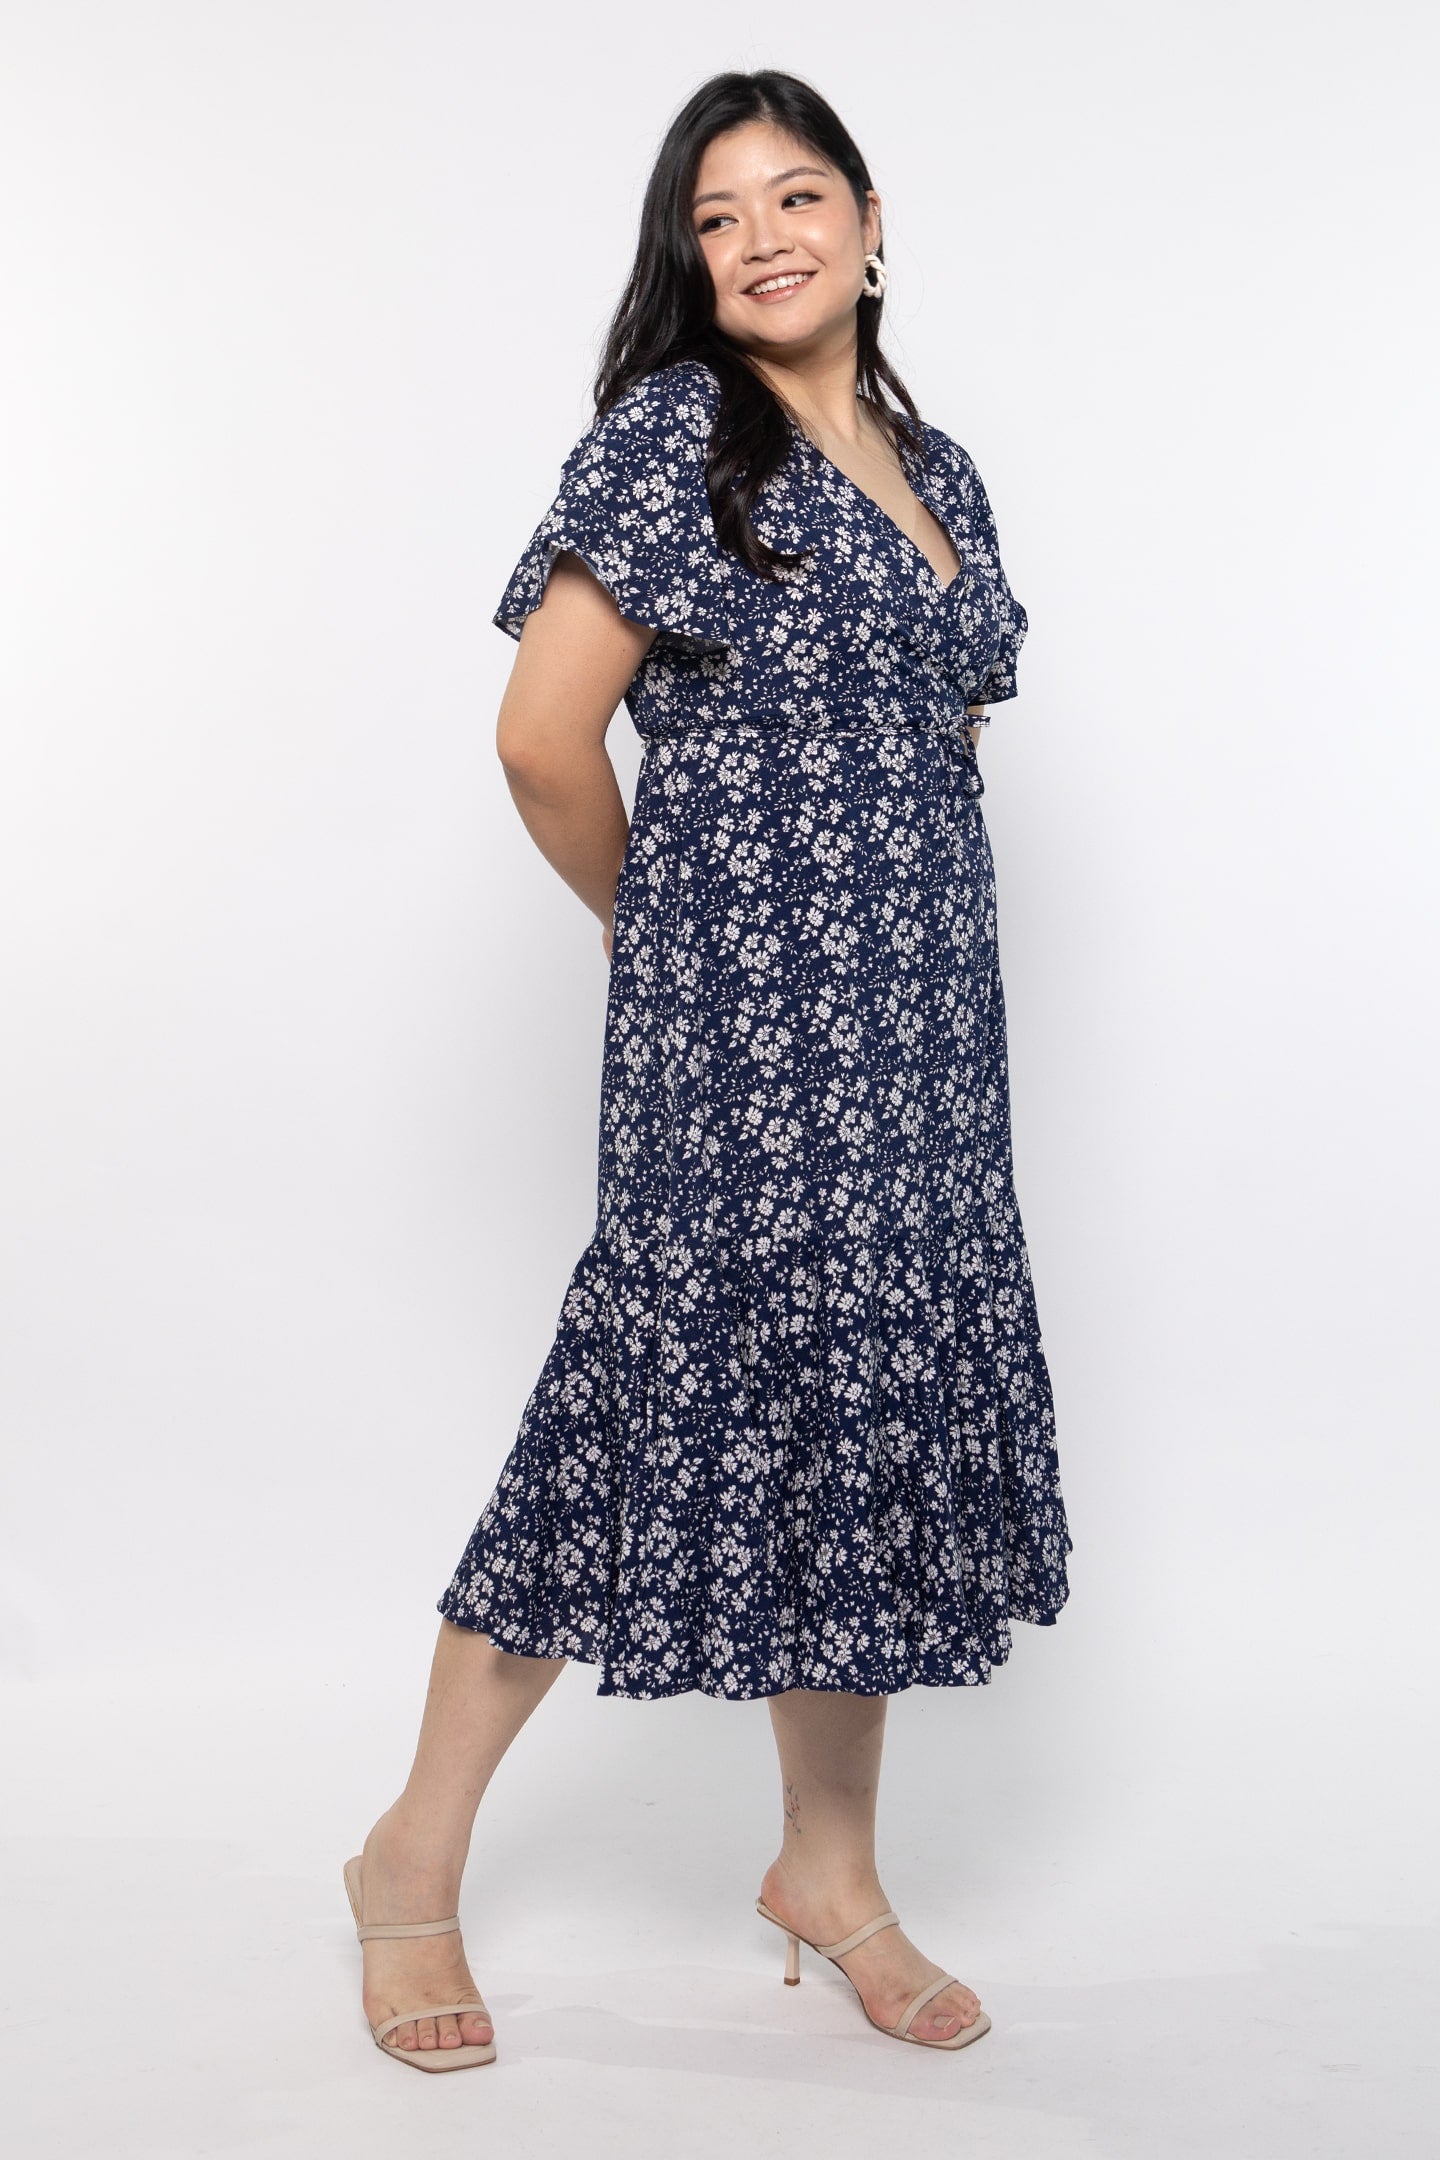 Ginnie Dress in Cheery Blooms